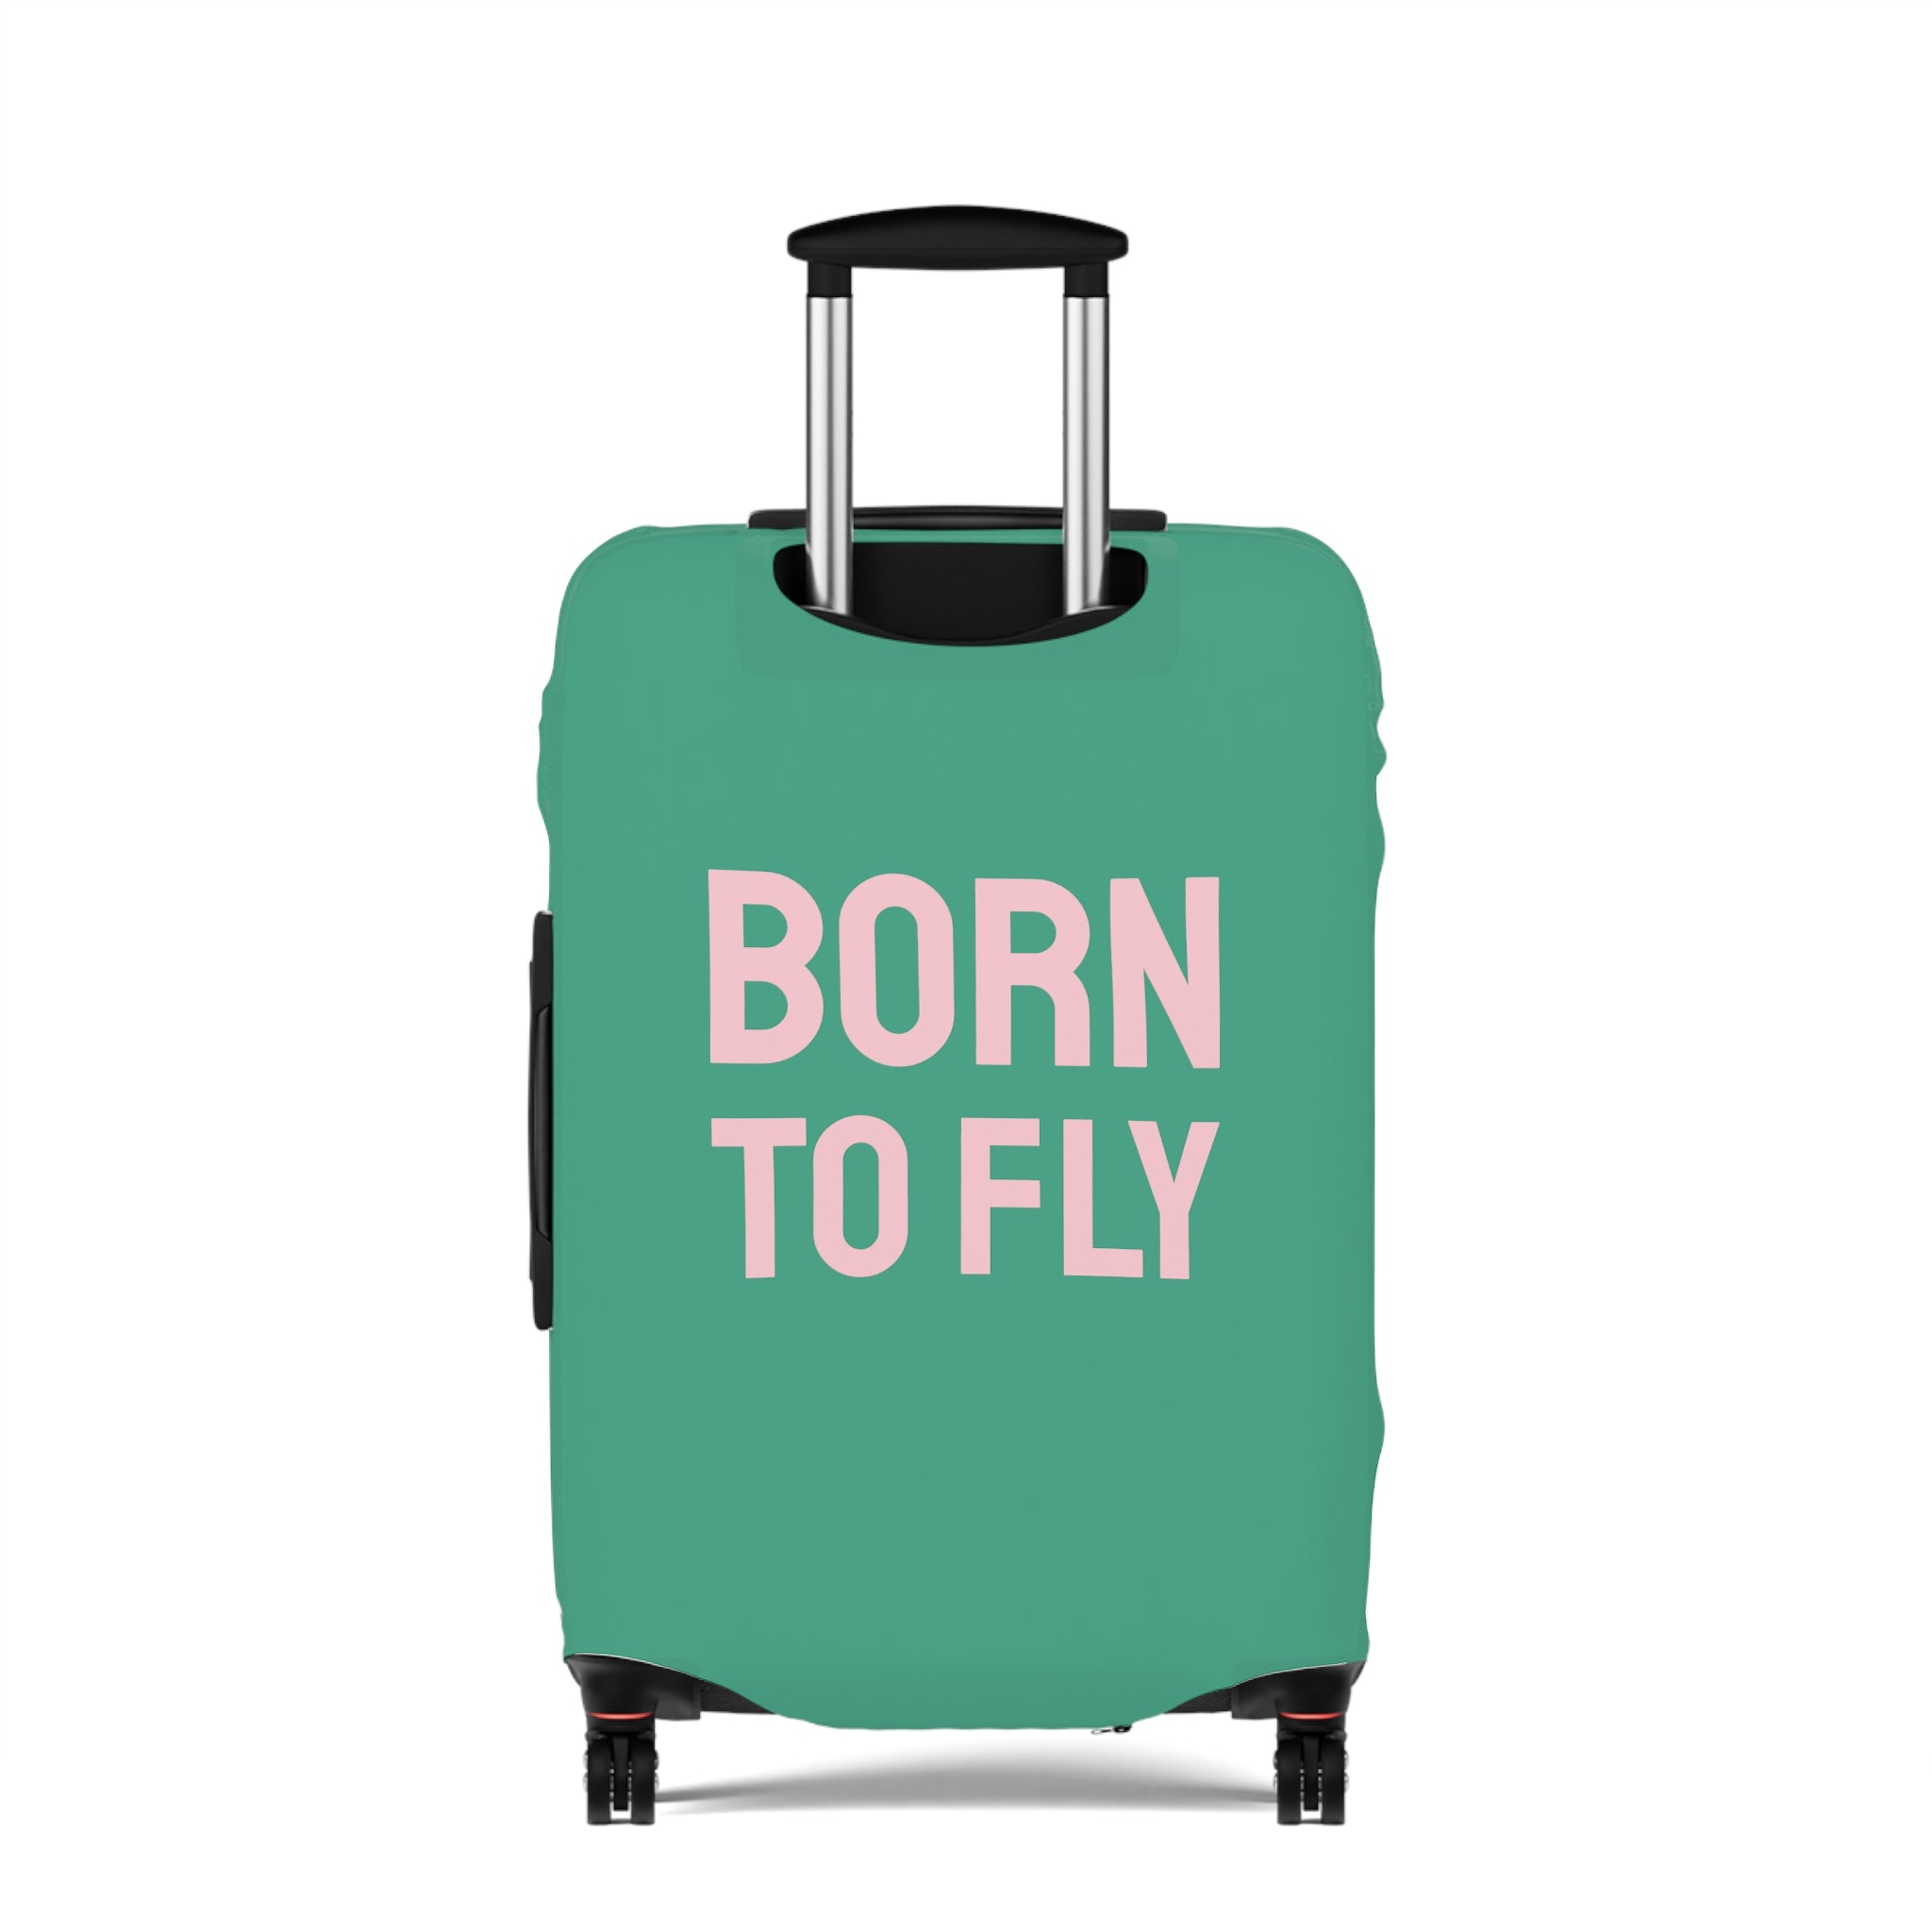 Born to fly Luggage Cover (Green)